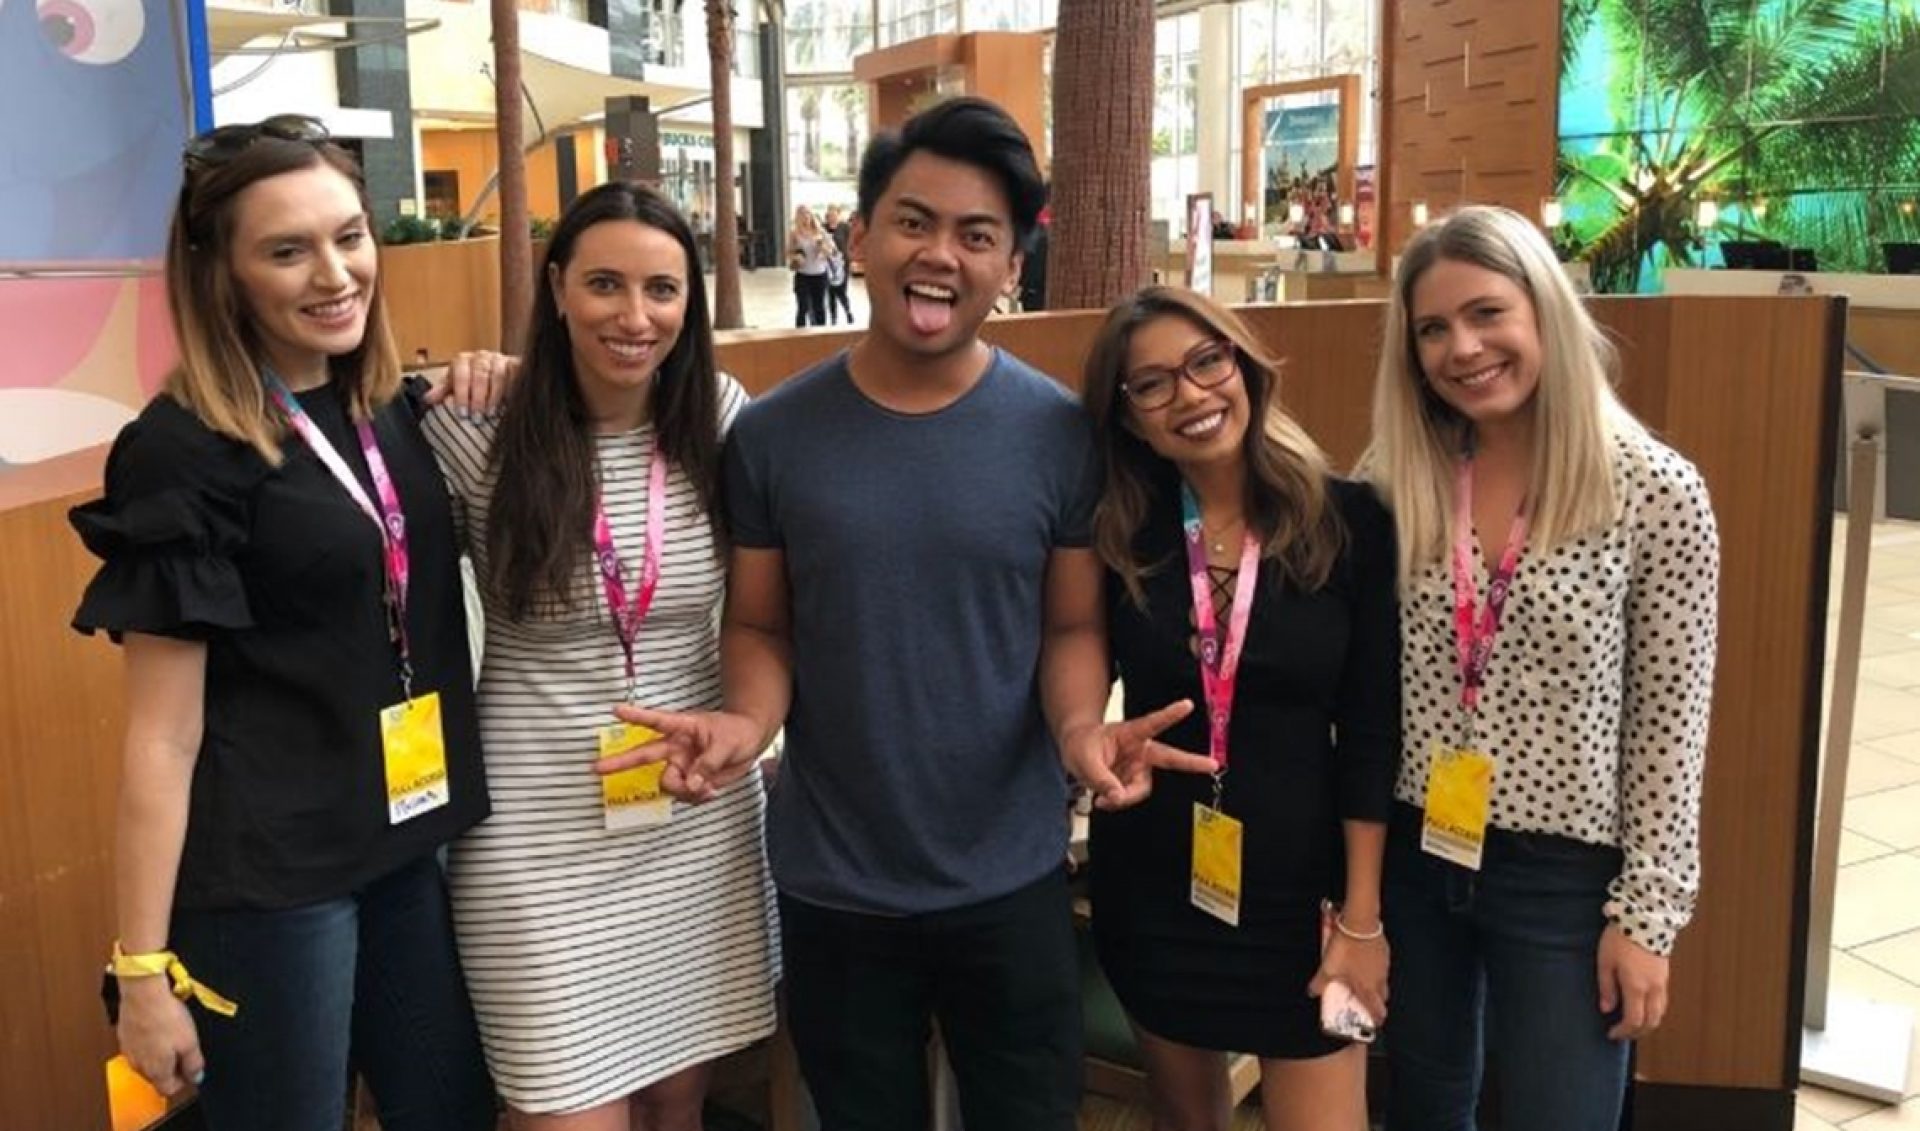 A Day In The Life Of Agents At VidCon With Abrams Artists’ ‘Quad Squad’